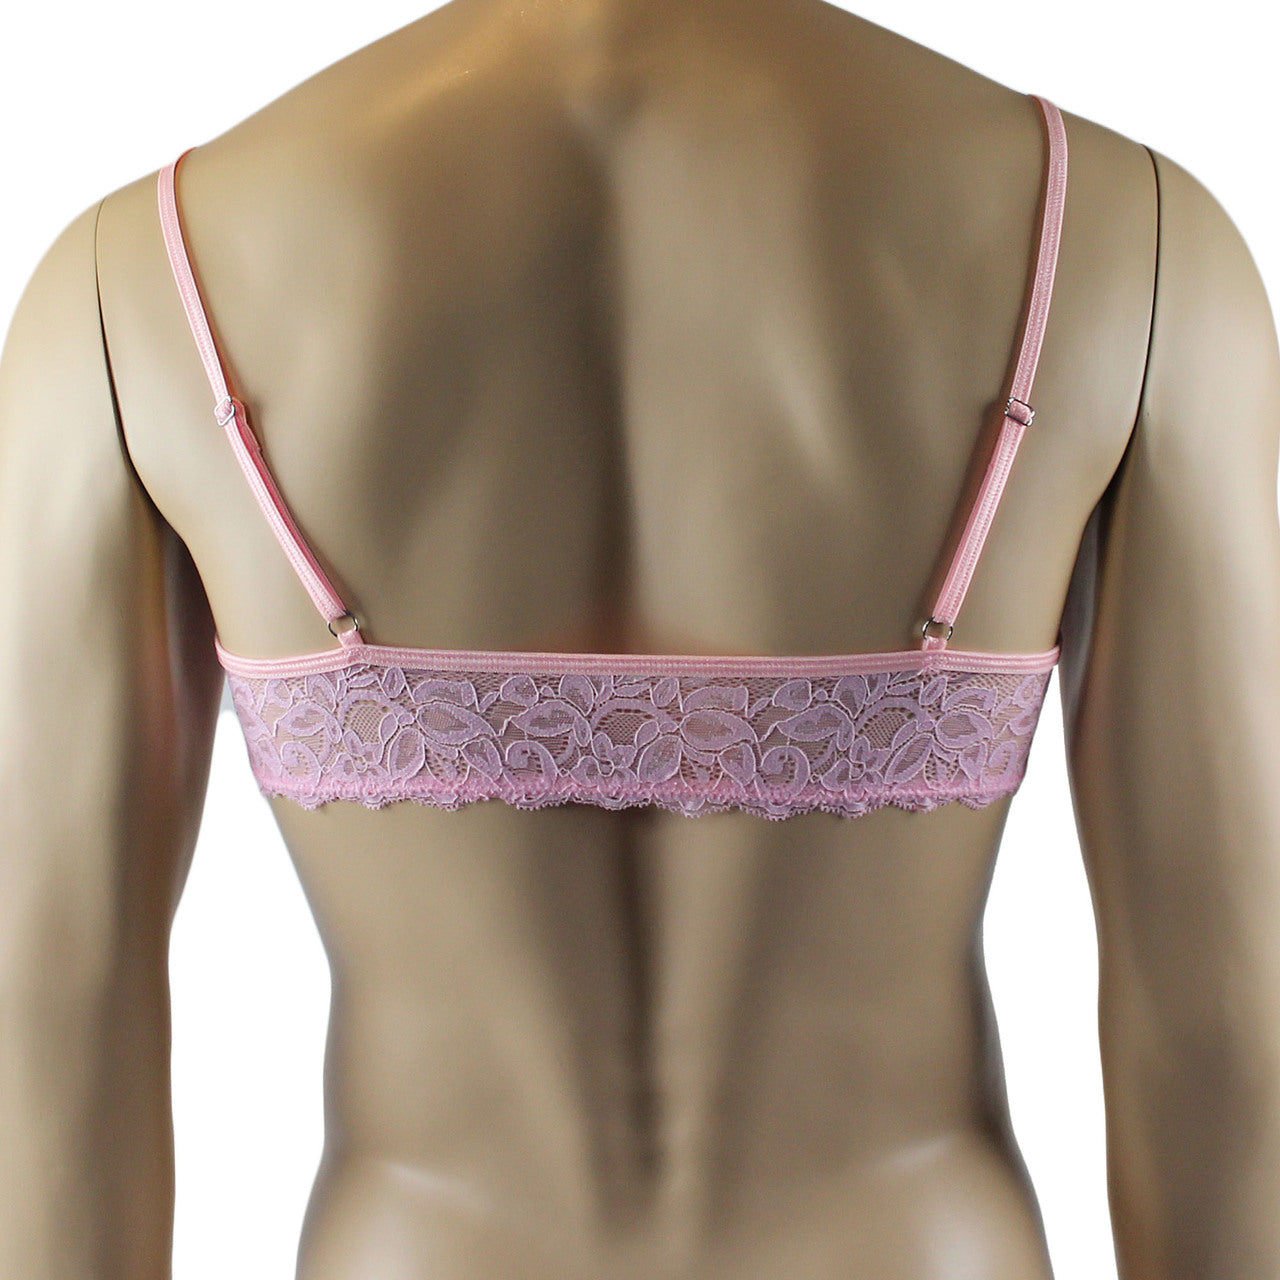 Mens Lingerie Bra Top in Lace with thin Straps (light pink plus other colours)